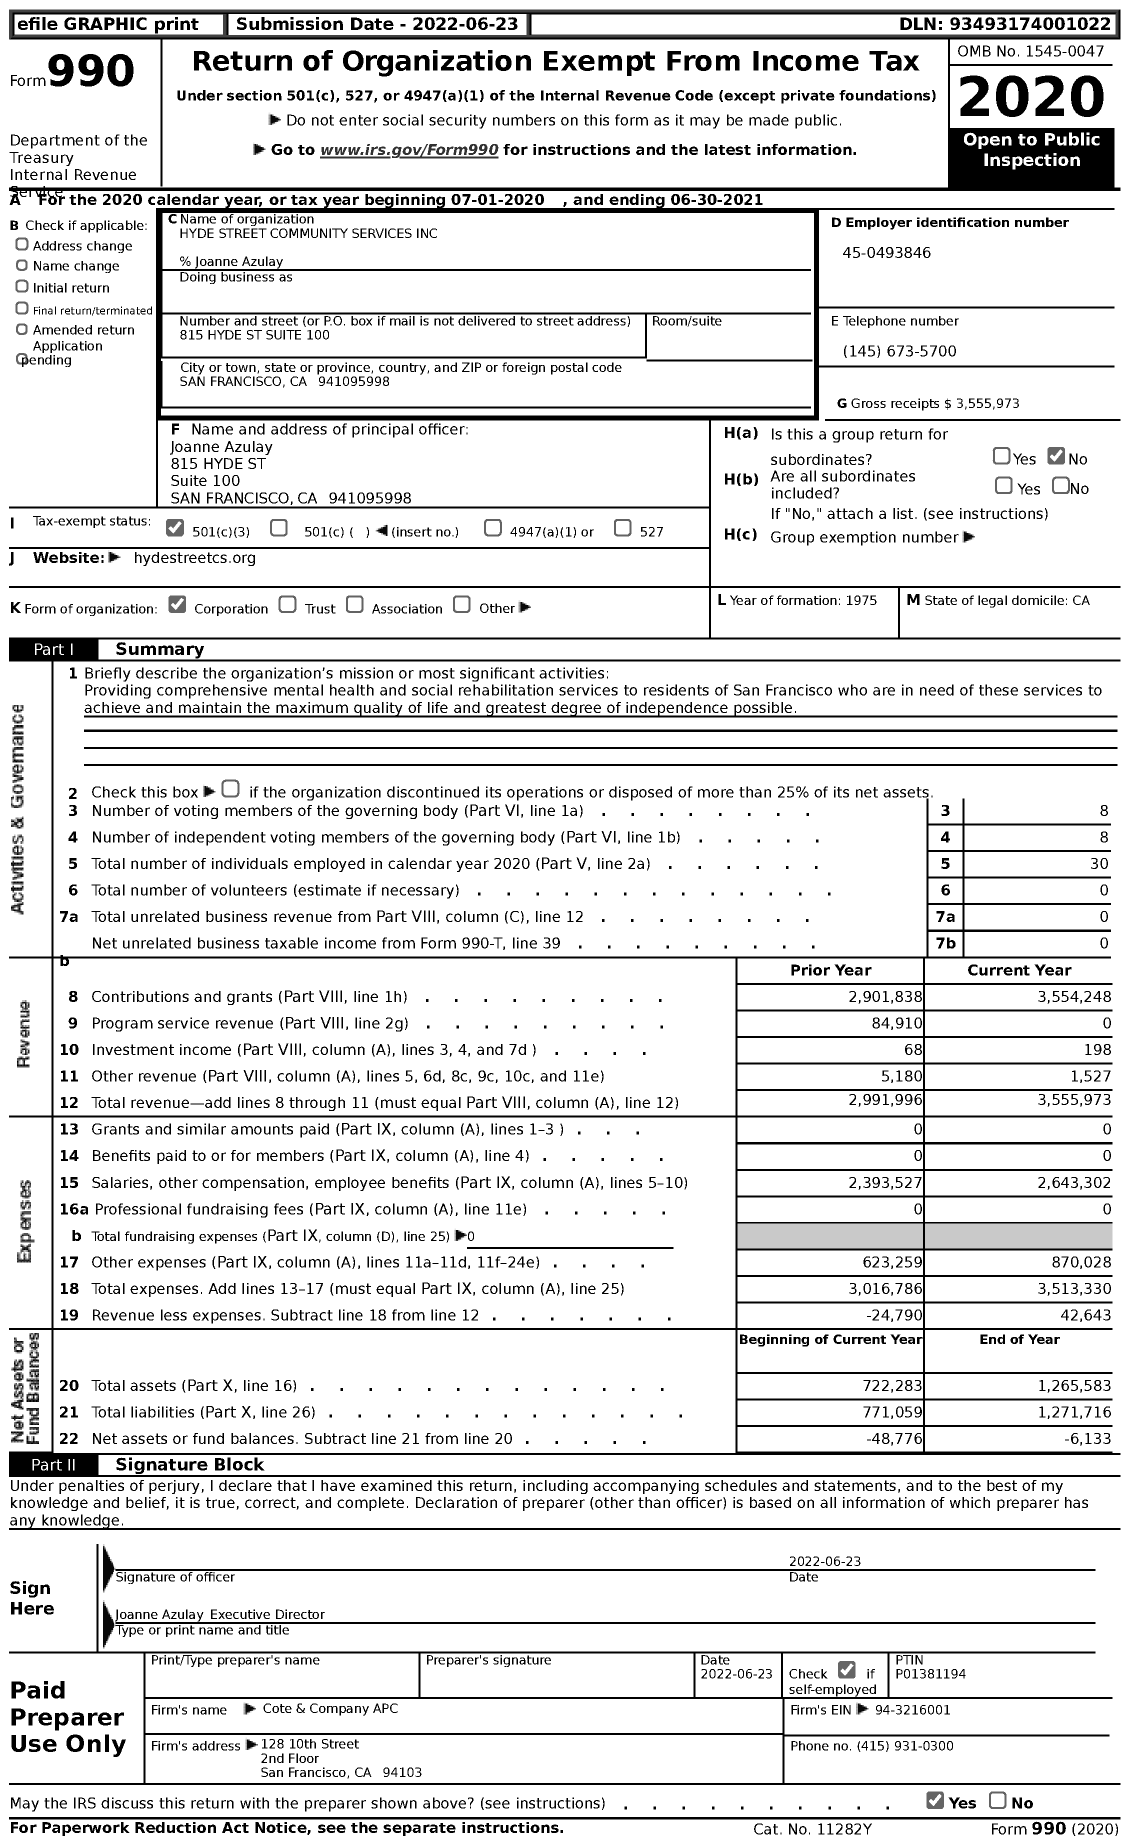 Image of first page of 2020 Form 990 for Hyde Street Community Services (HSCS)